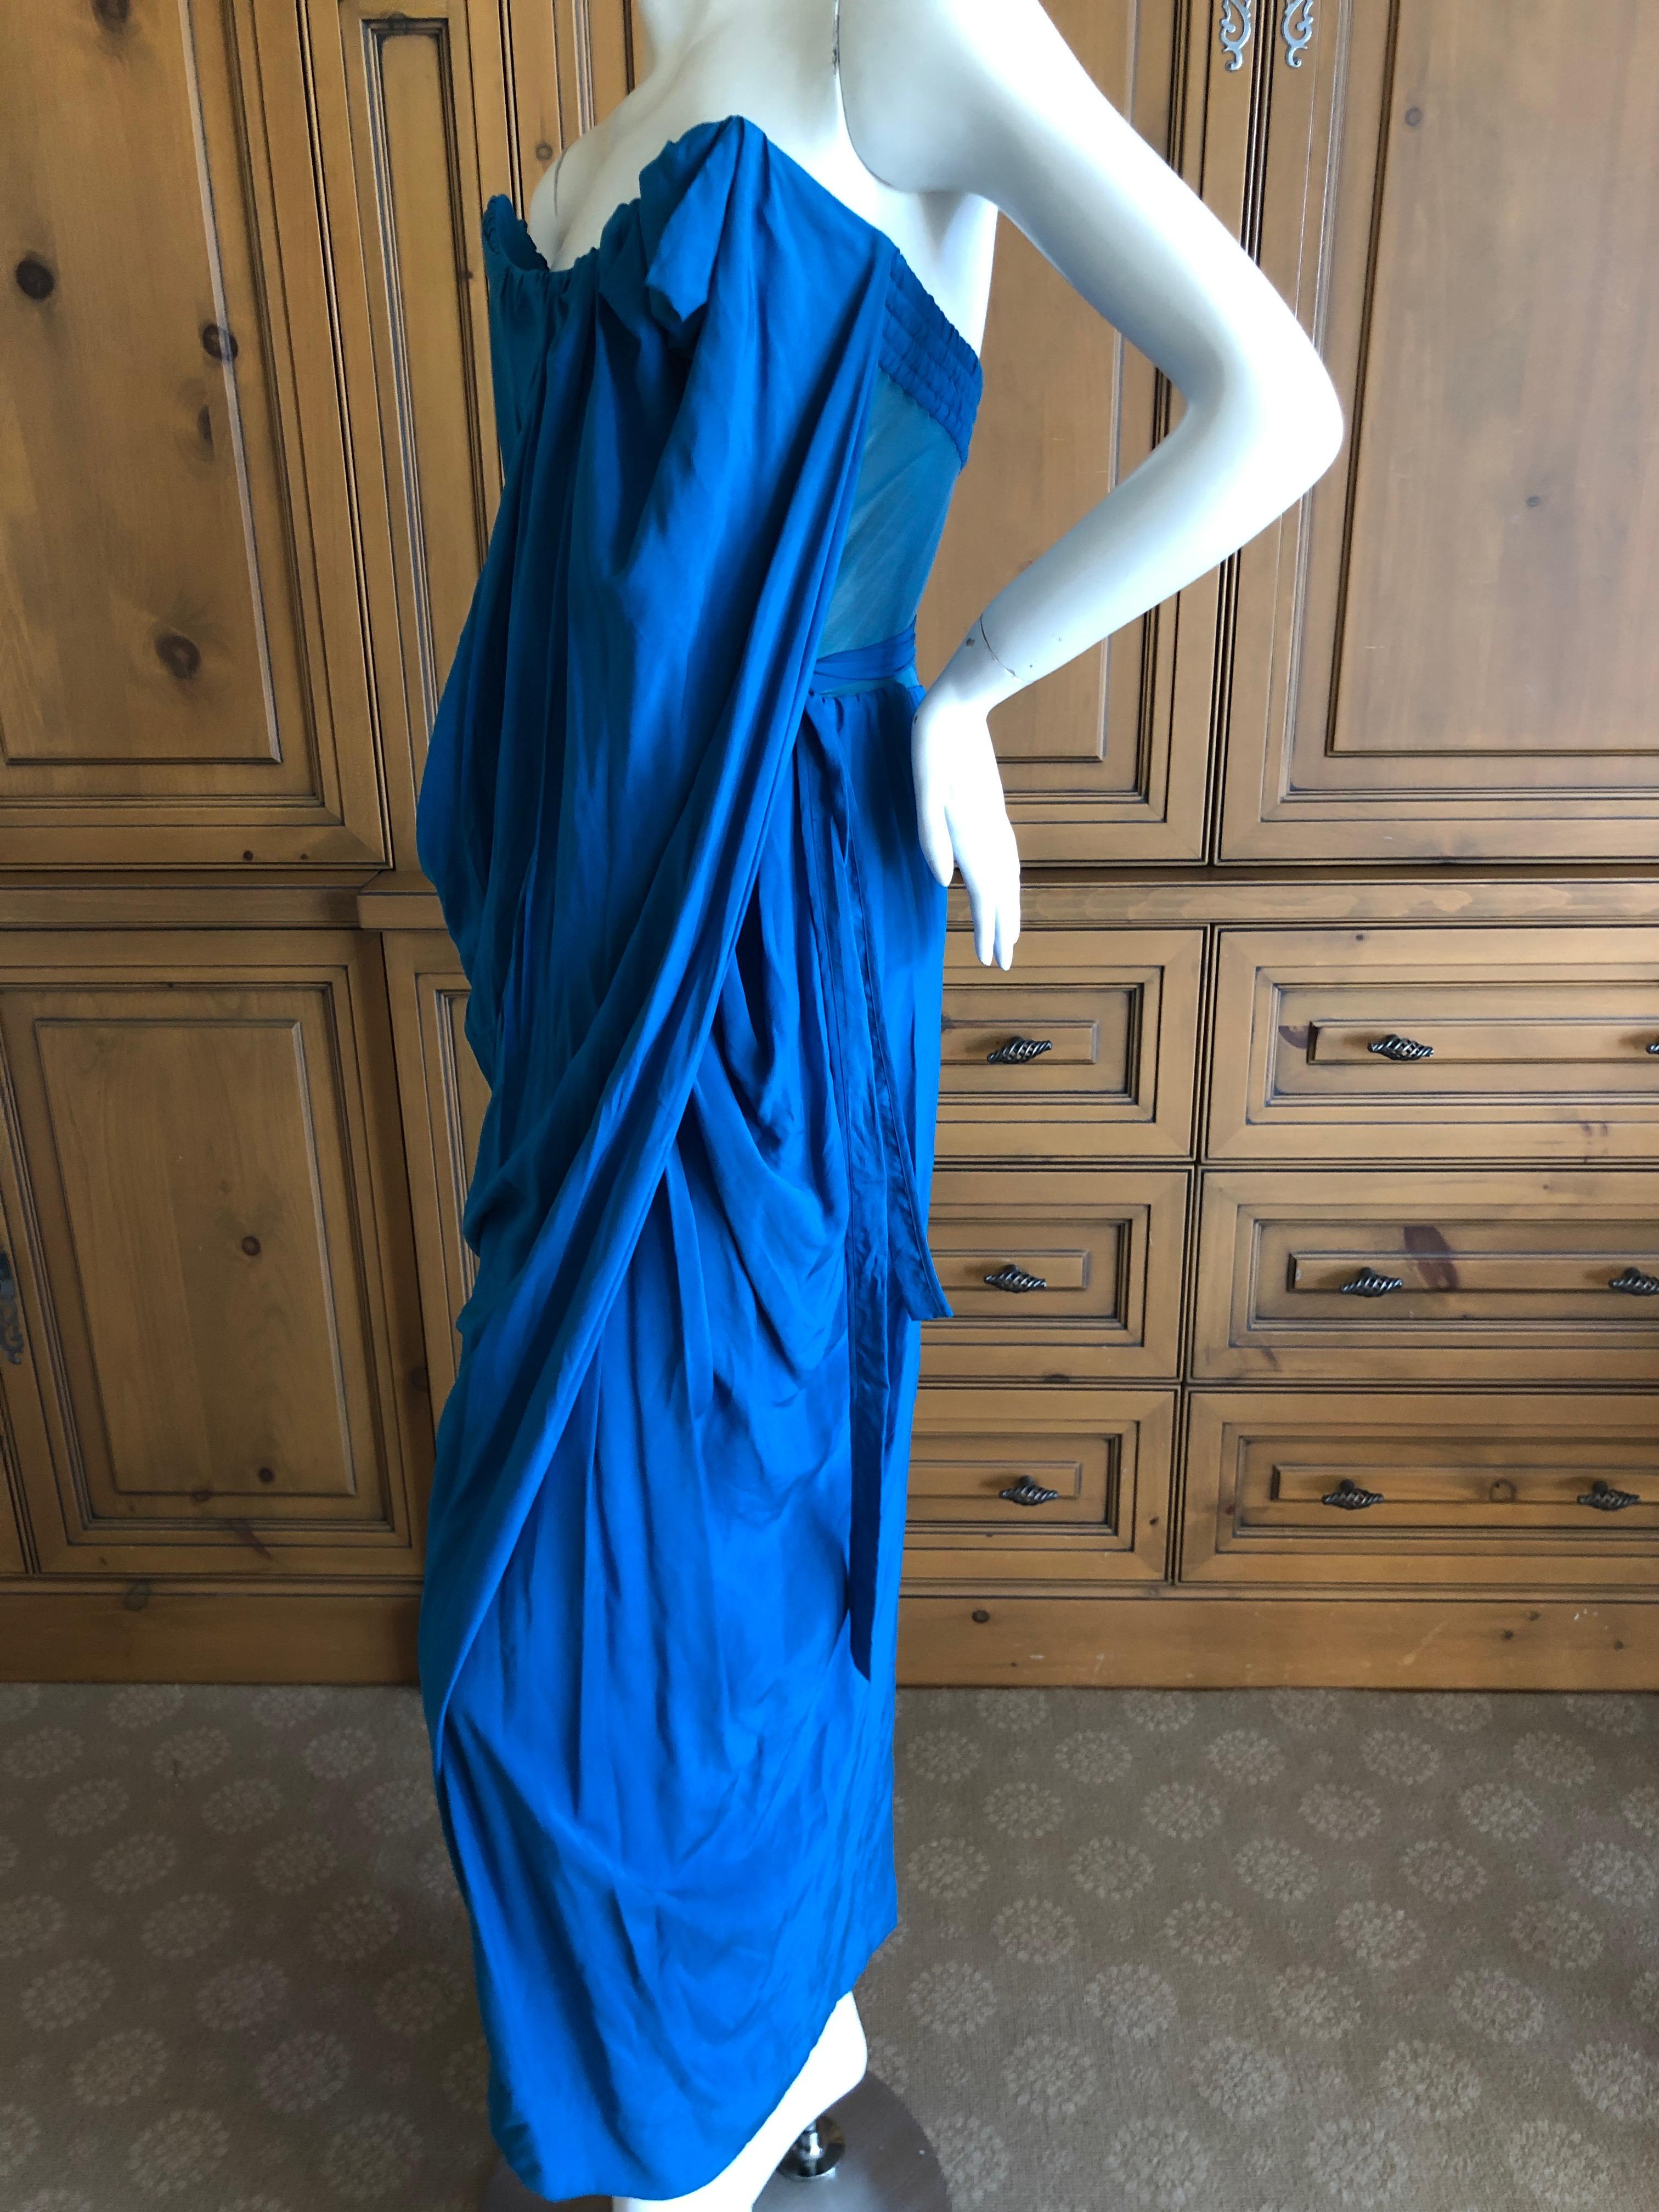 Andreas Kronthaler for Vivienne Westwood Blue Evening Dress with Built In Corset For Sale 2